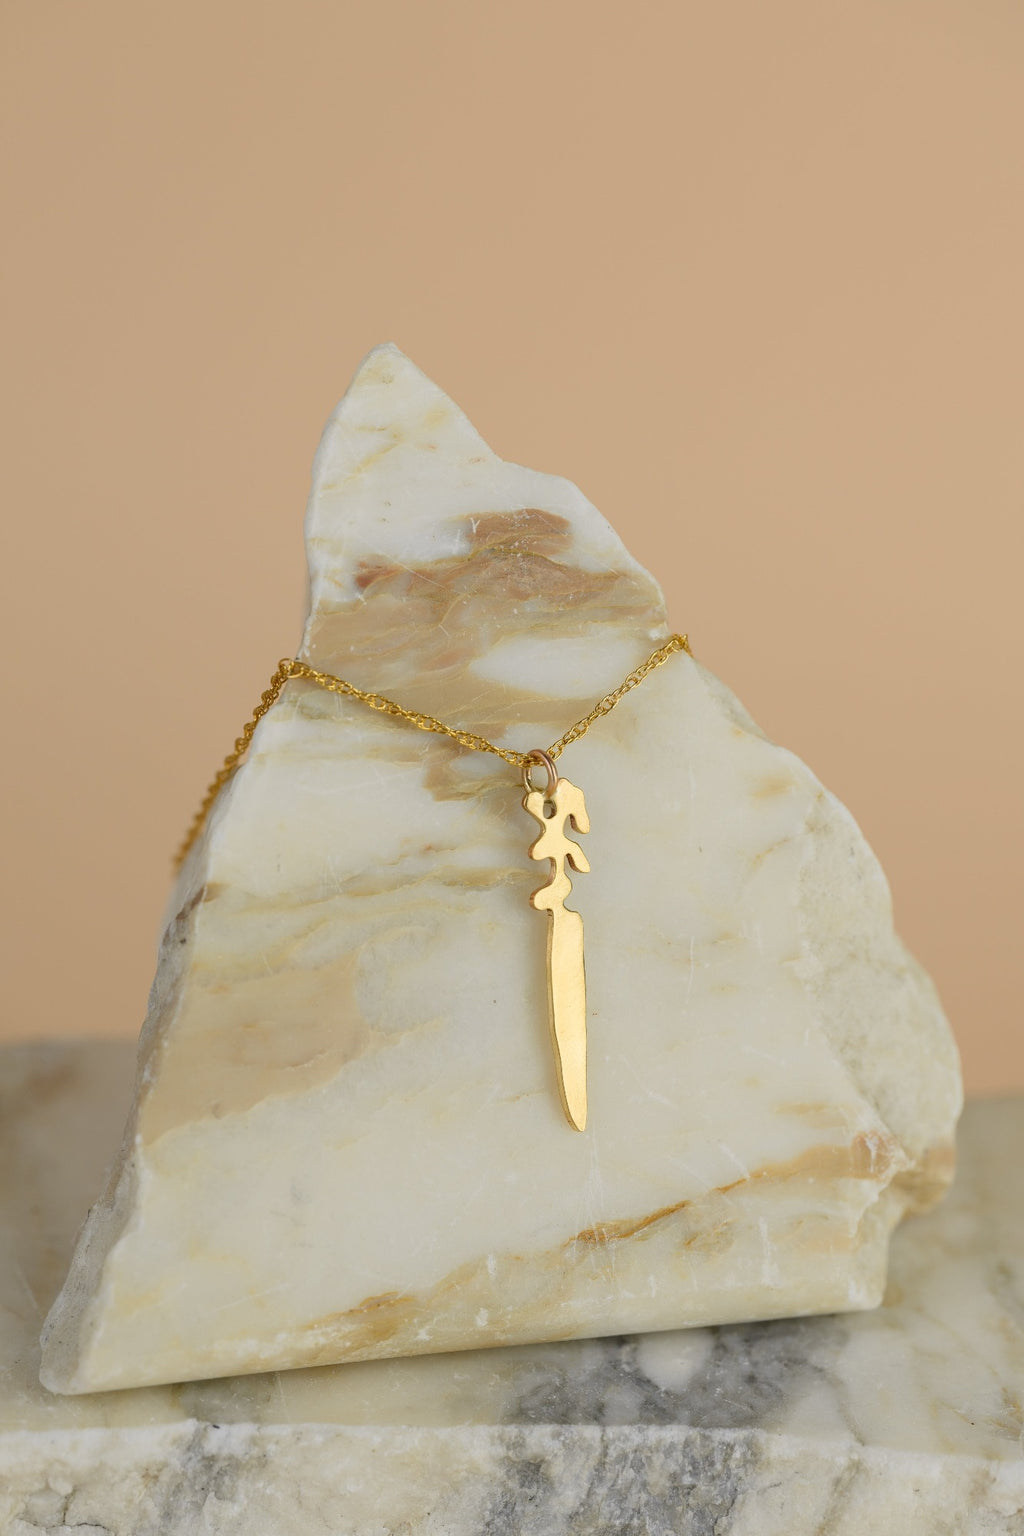 Landmass shaped Dagger sits on a triangle shaped piece of marble